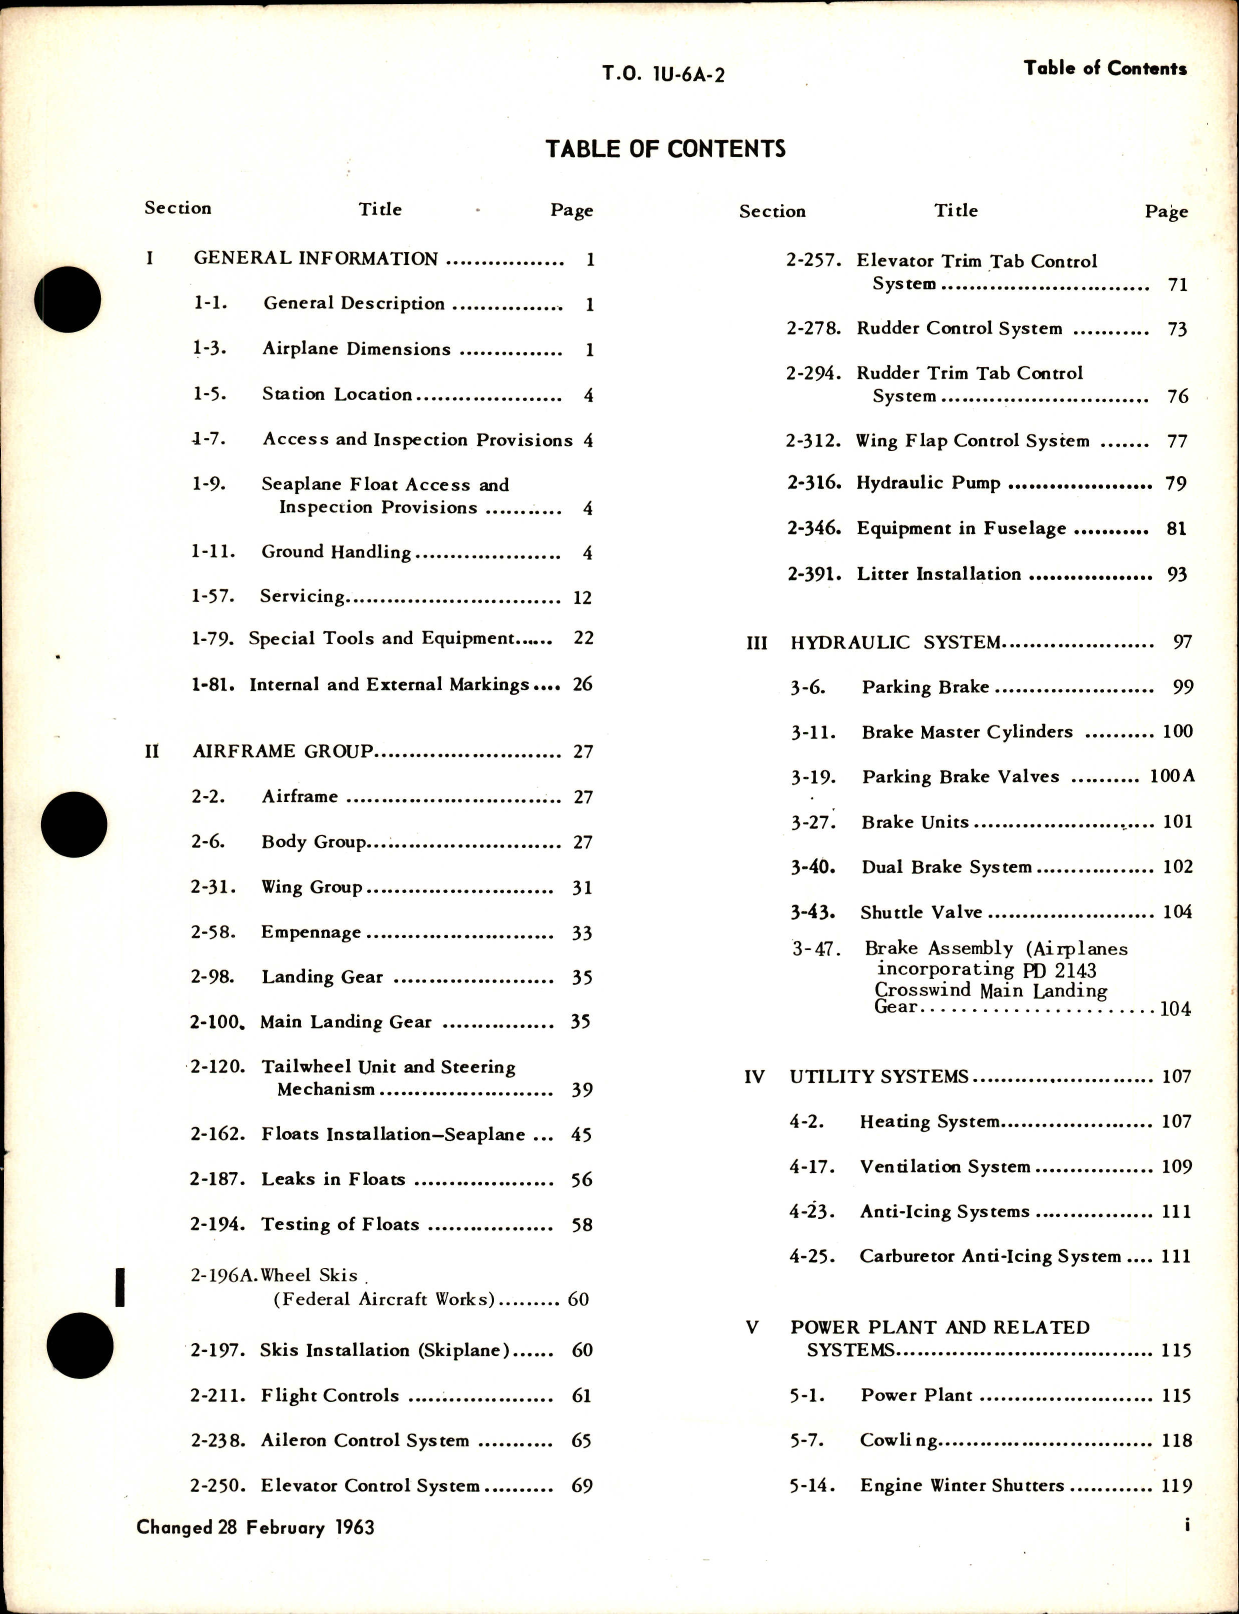 Sample page 1 from AirCorps Library document: Maintenance Manual for L-20A 